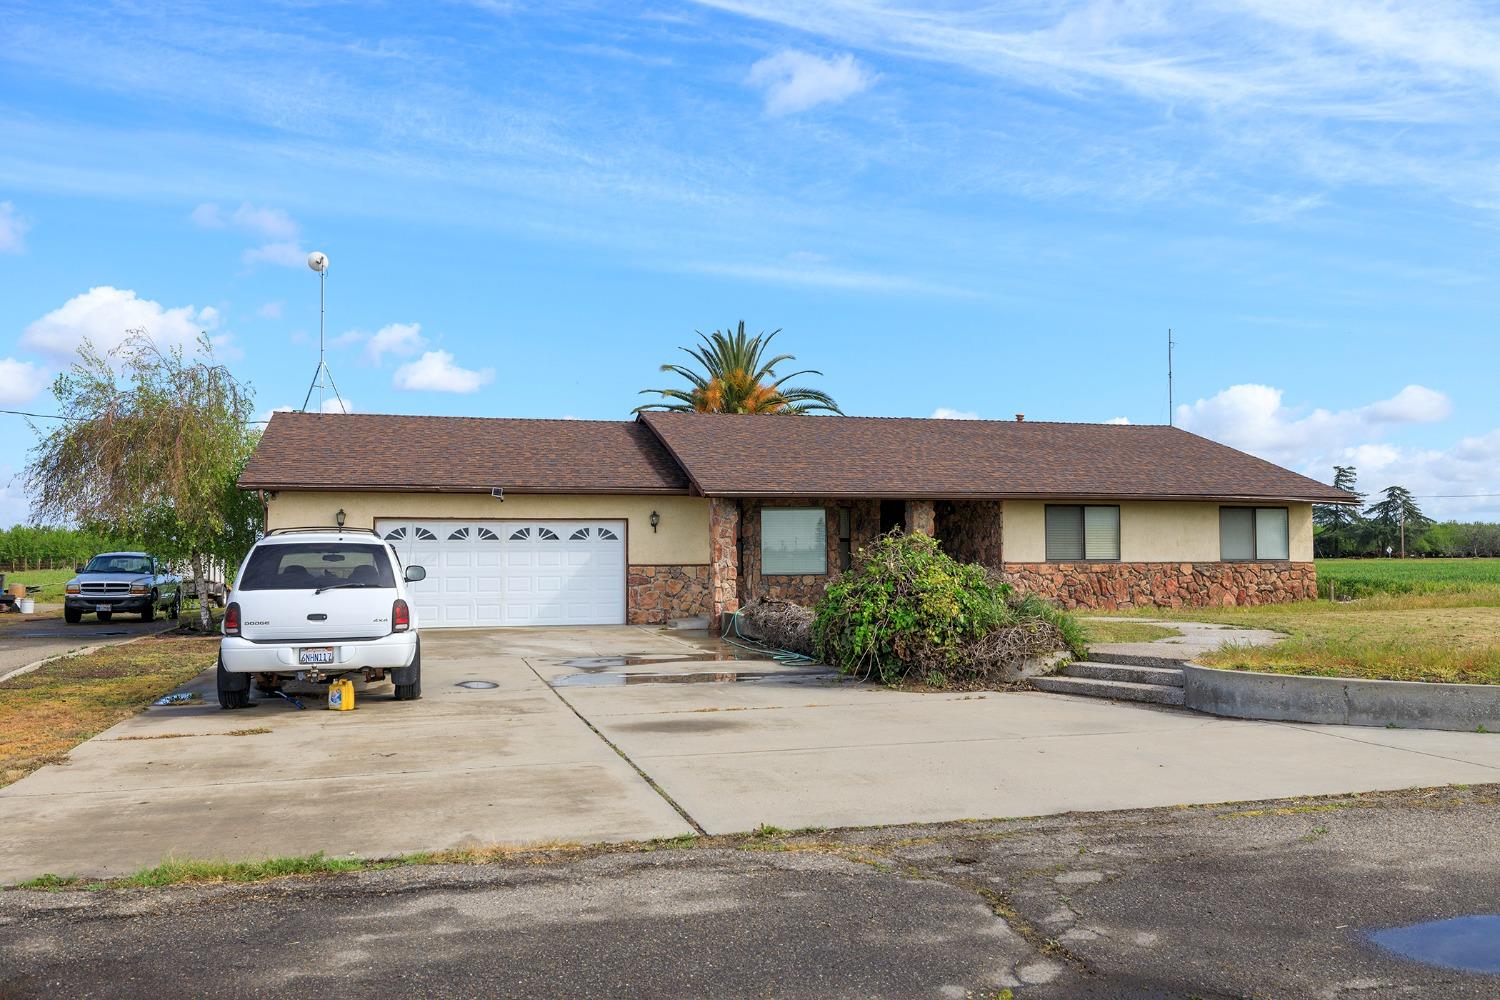 Photo of 18108 W August Ave in Hilmar, CA